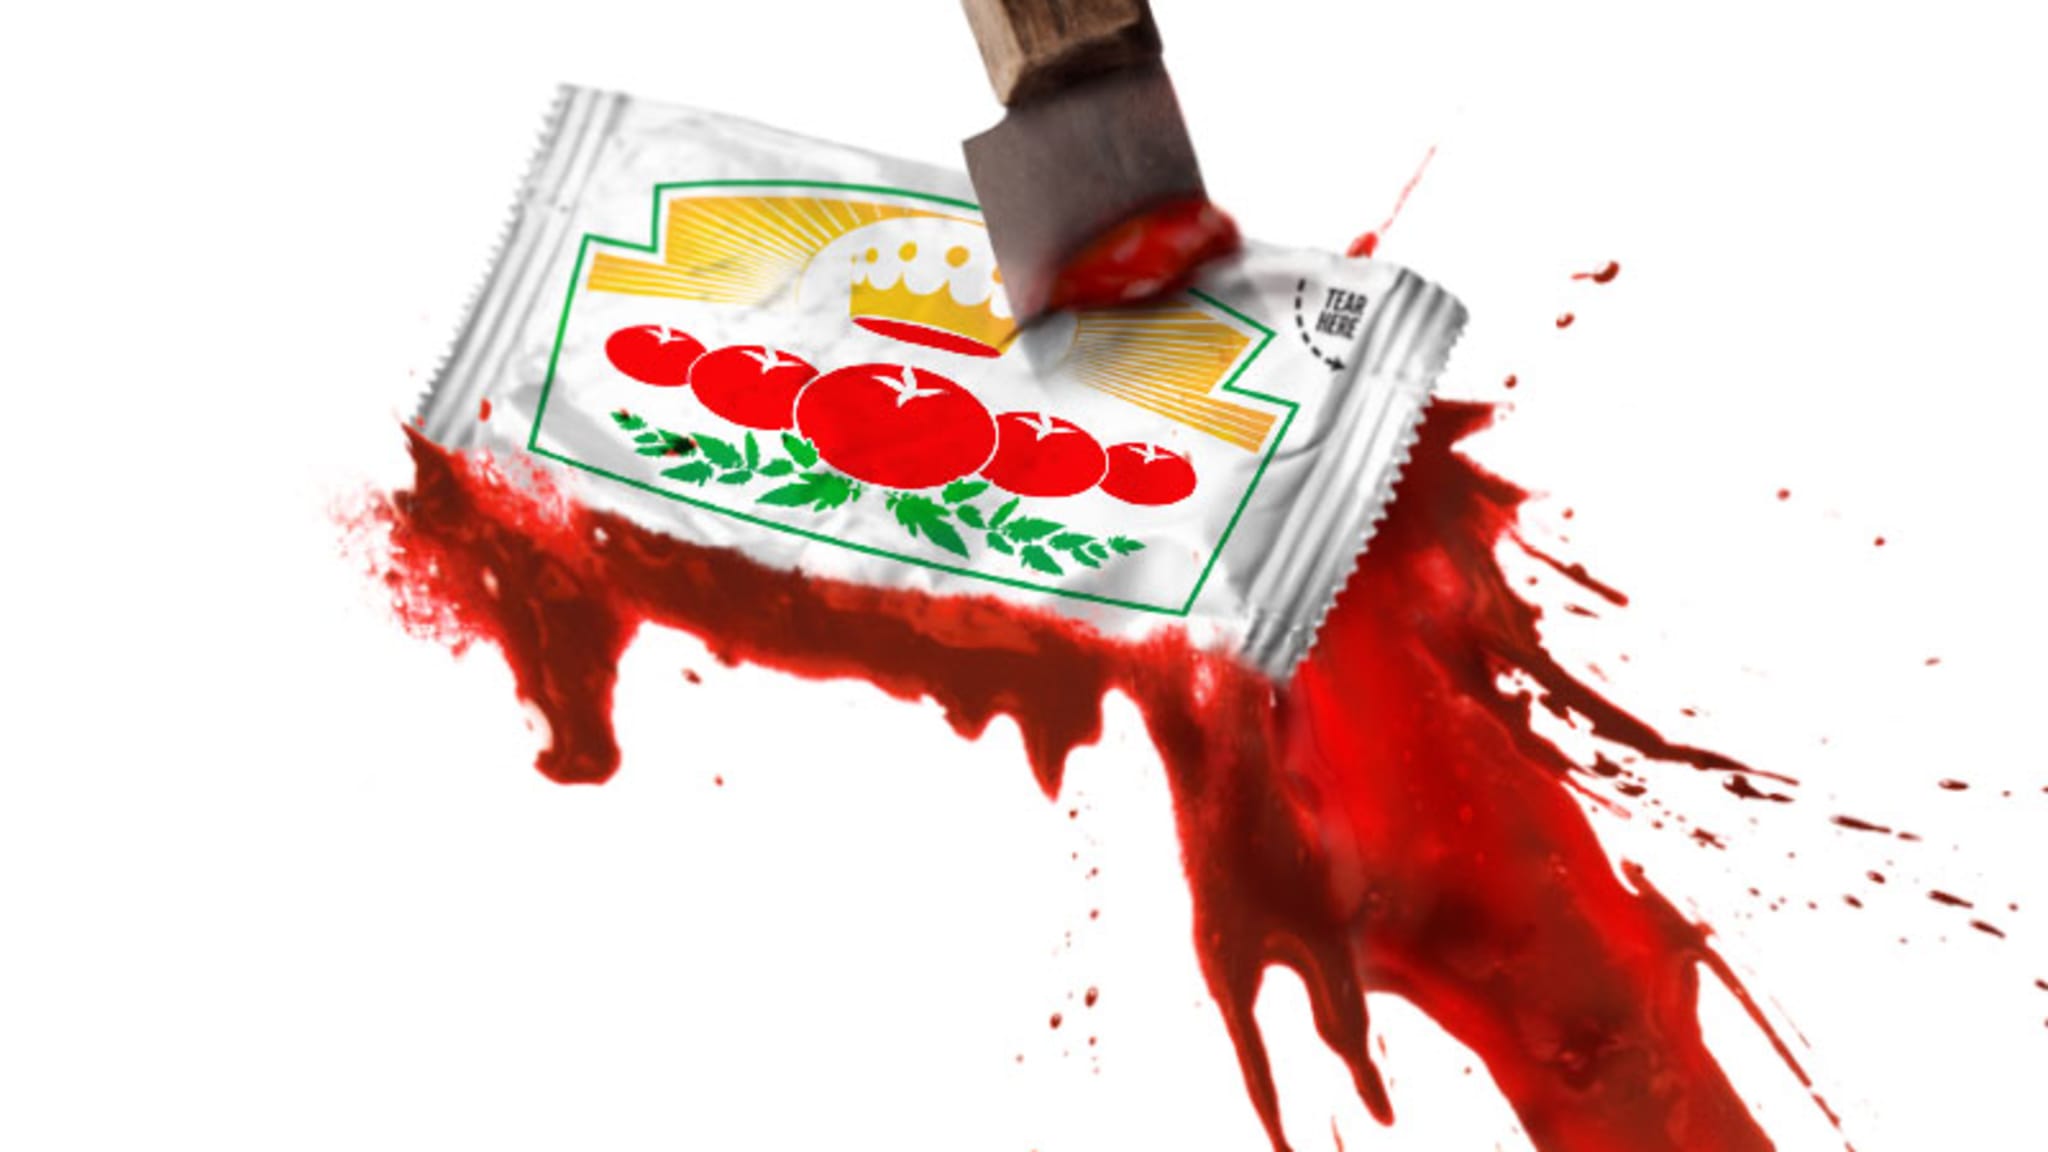 Artwork for Scotland, PA. A knife stabbed through a ketchup packet that splatters on impact.